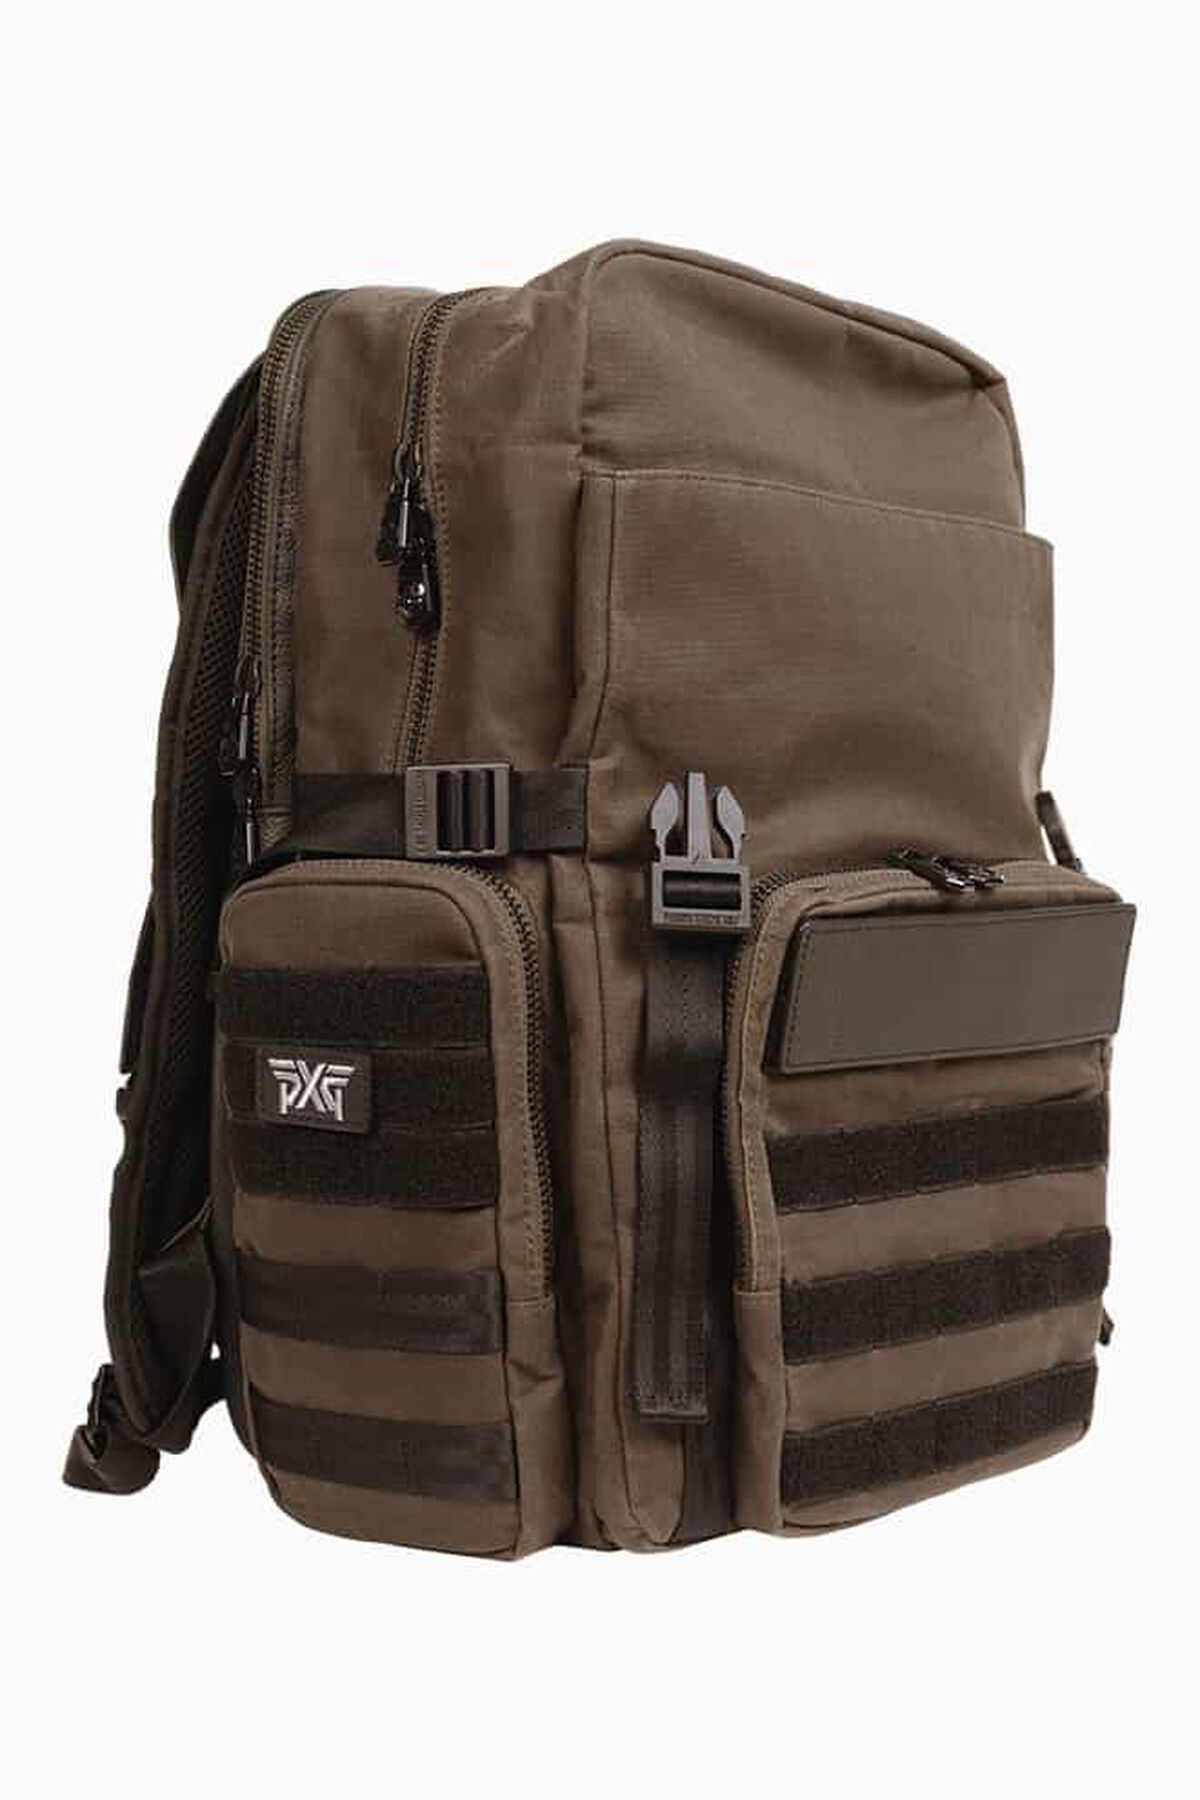 PXG Troops Darkness Backpack 